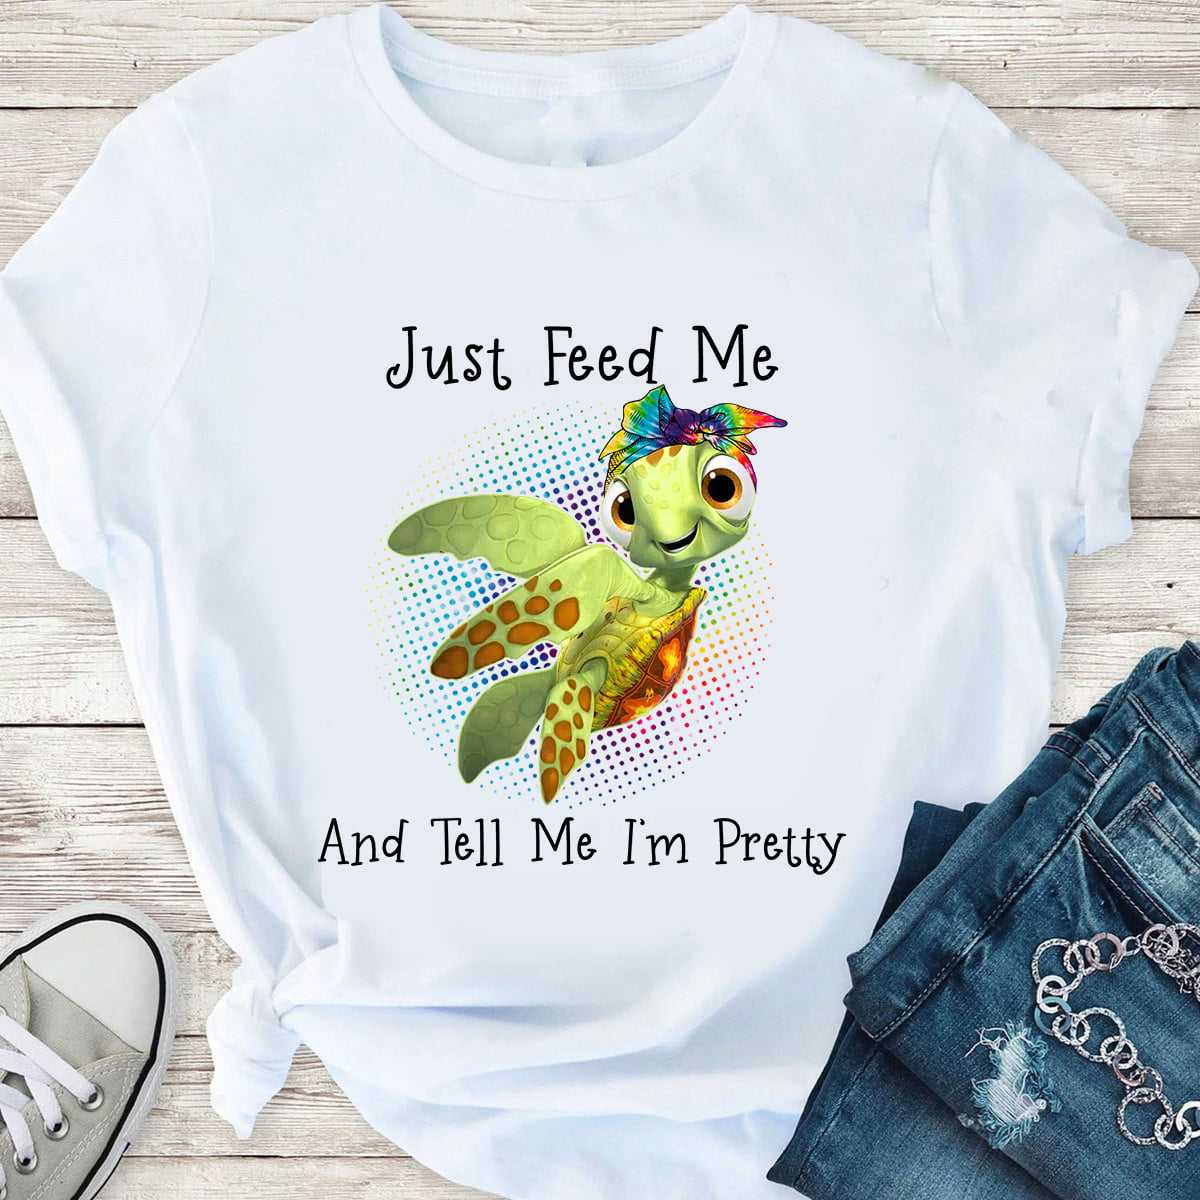 Just feed me and tell me I'm pretty - Gorgeous turtle